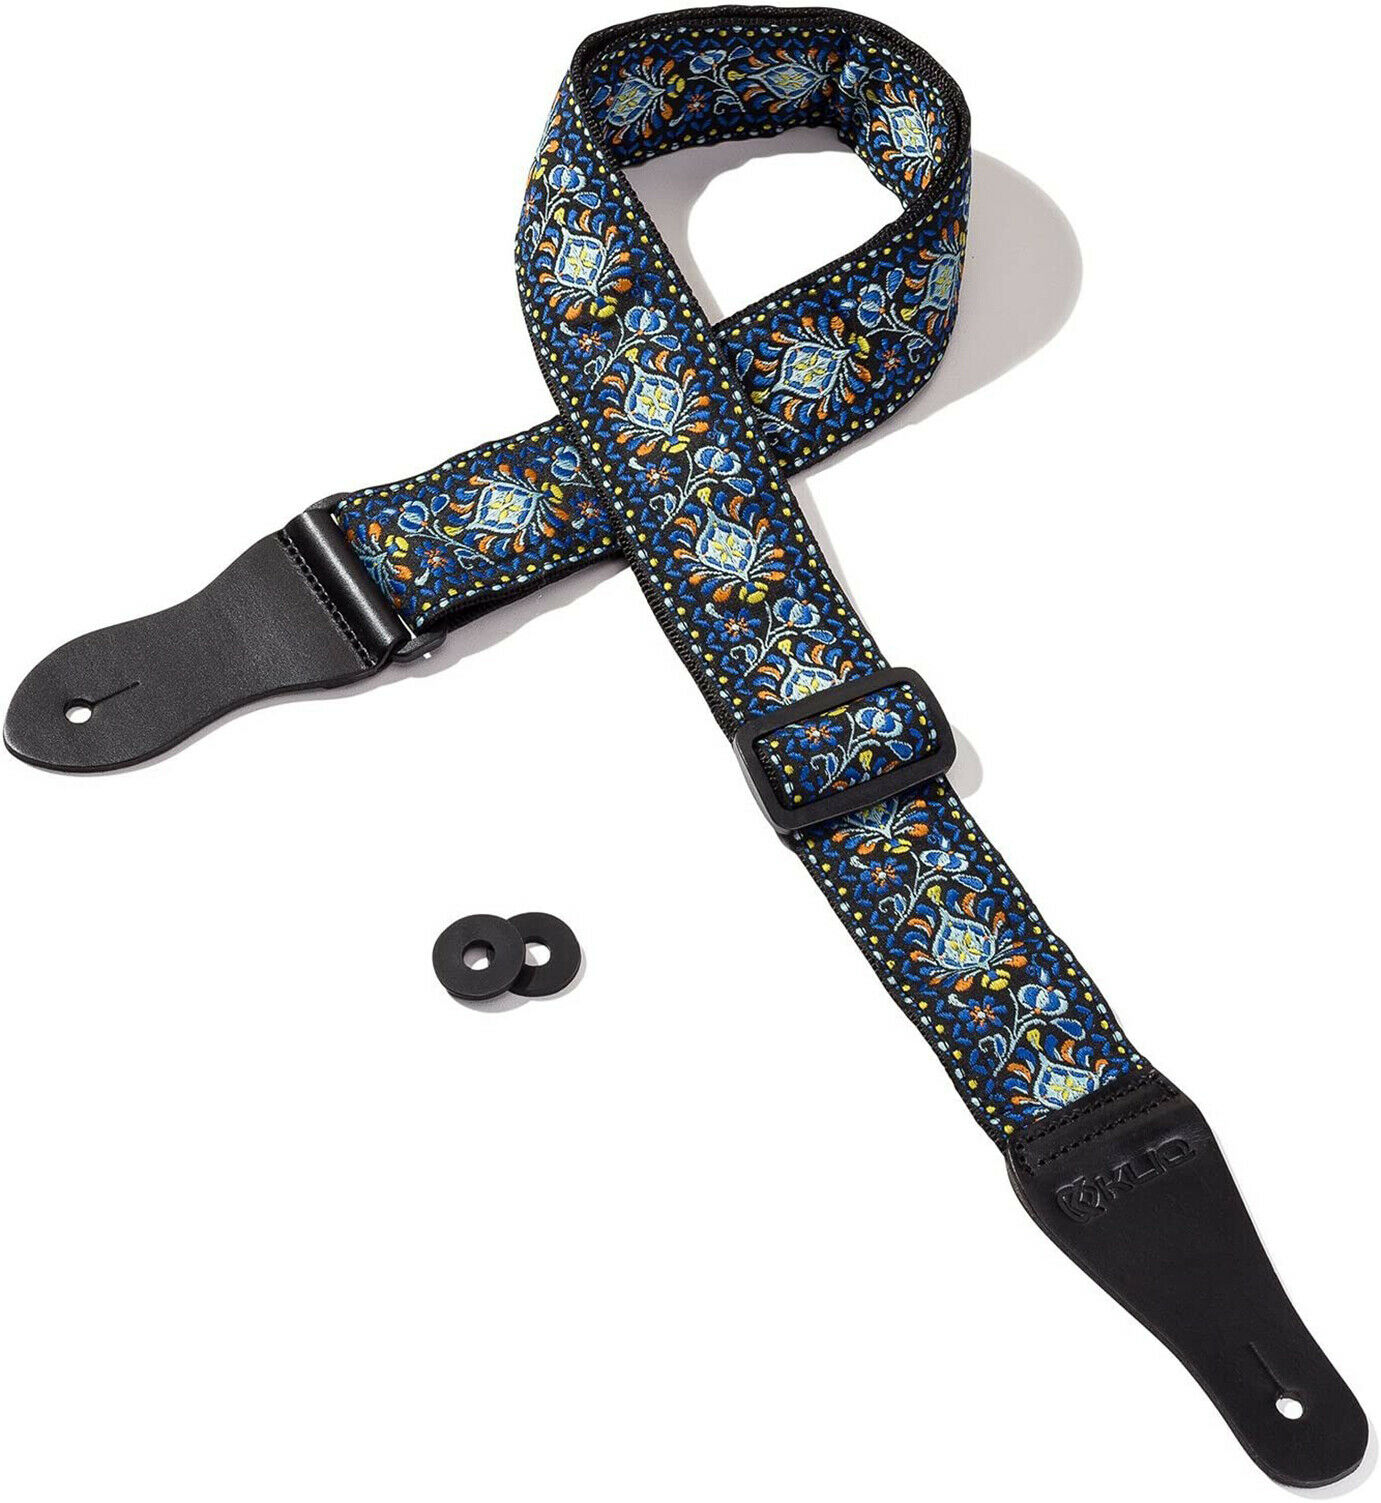 Vintage Woven Guitar Strap For Acoustic And Electric Guitars '60s Jacquard Weave